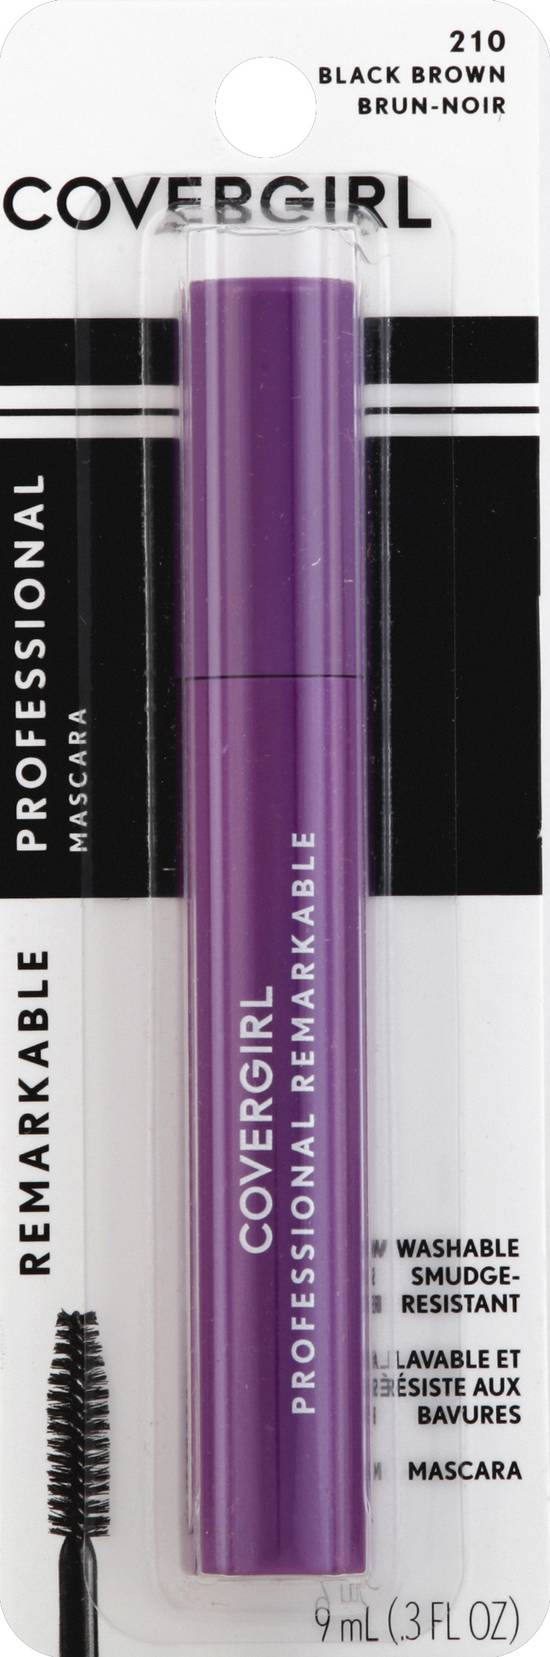 Covergirl Professional Remarkable Mascara (210 black brown)